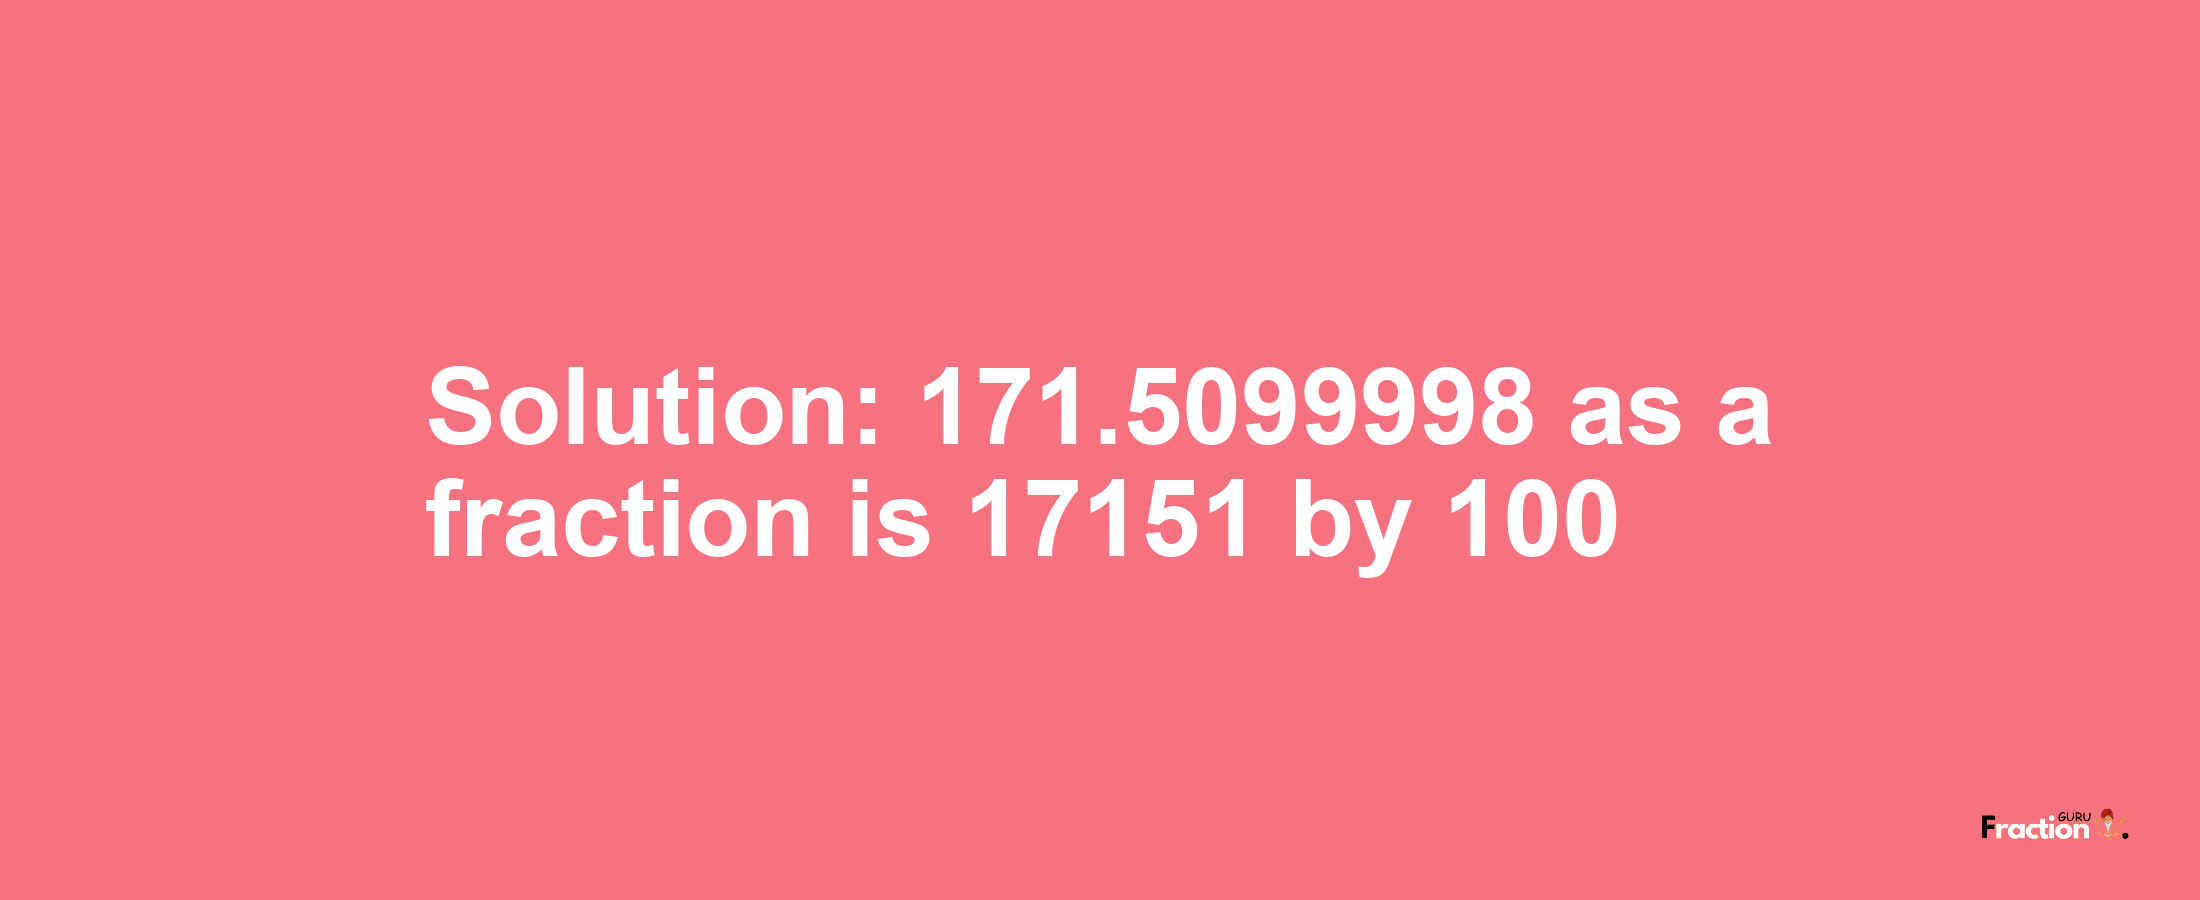 Solution:171.5099998 as a fraction is 17151/100